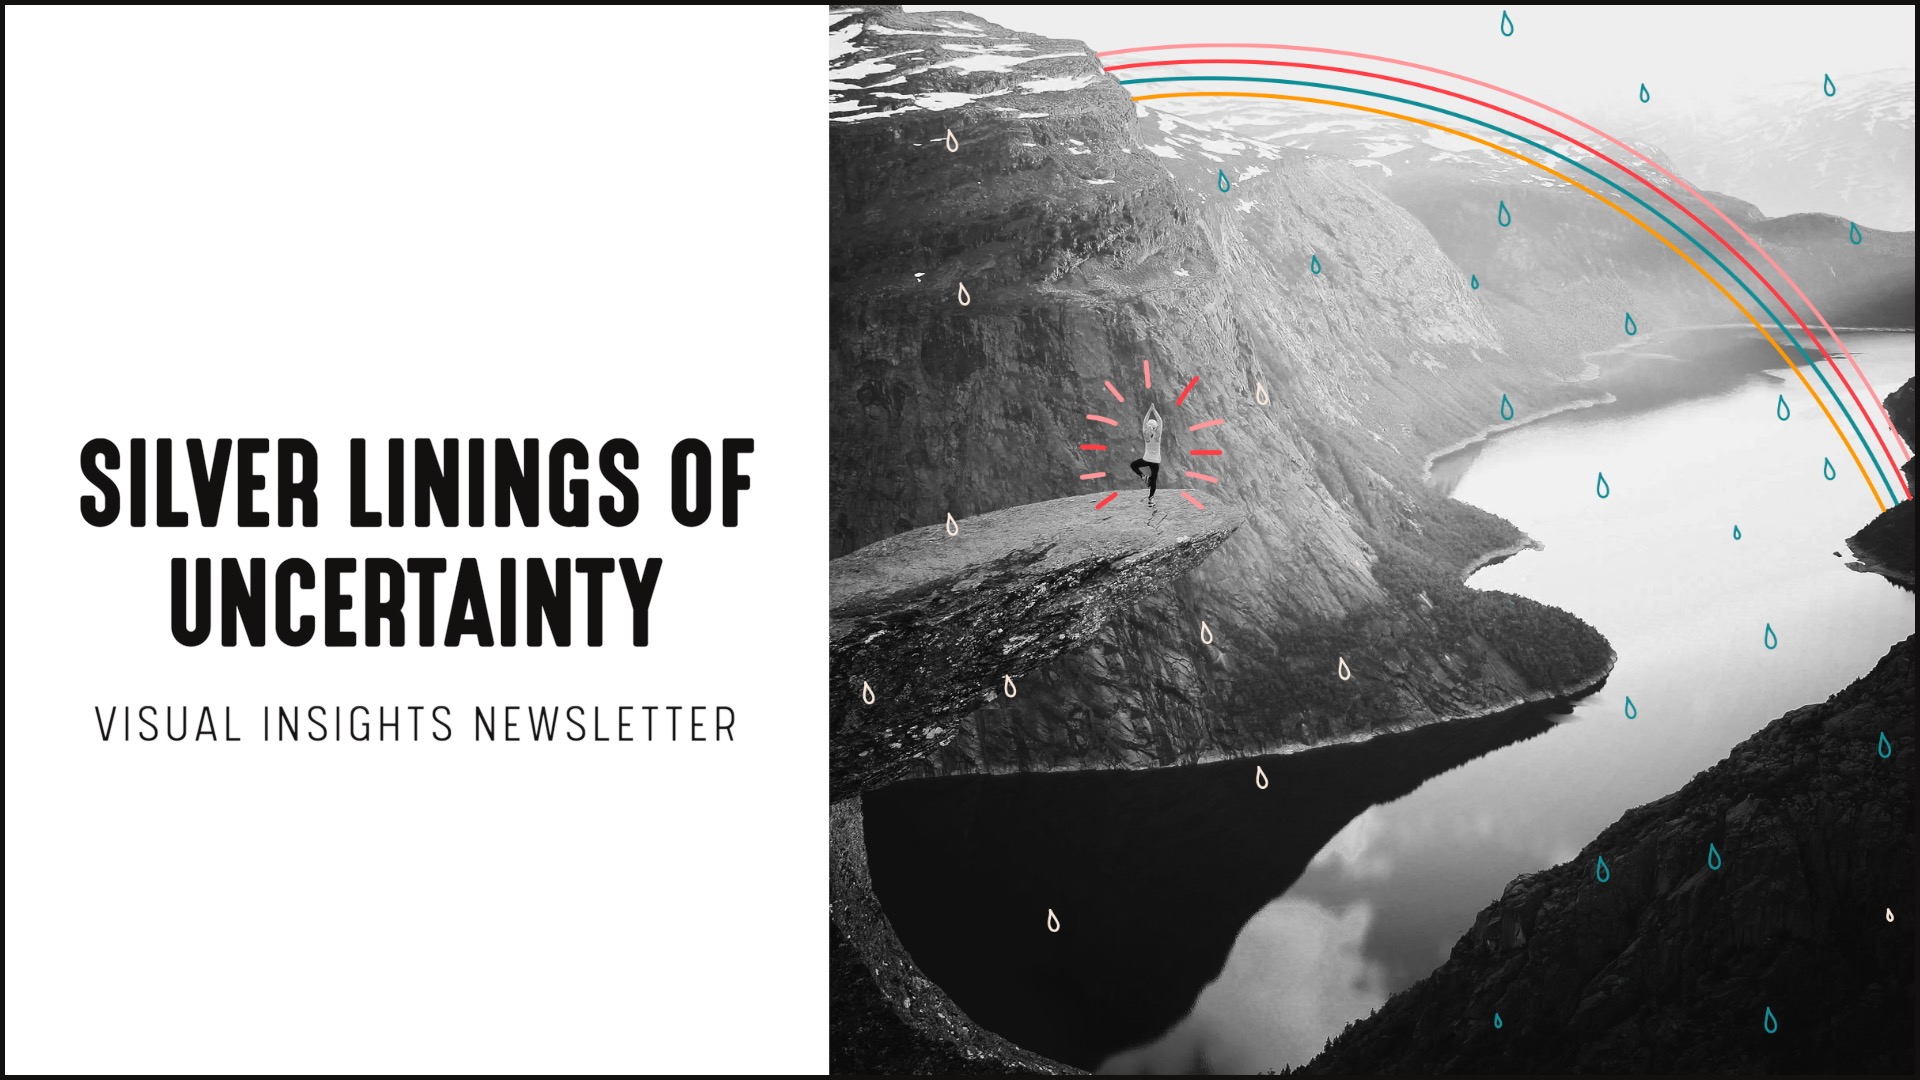 [NEW] Visual Insights Newsletter - Silver Linings of Uncertainty